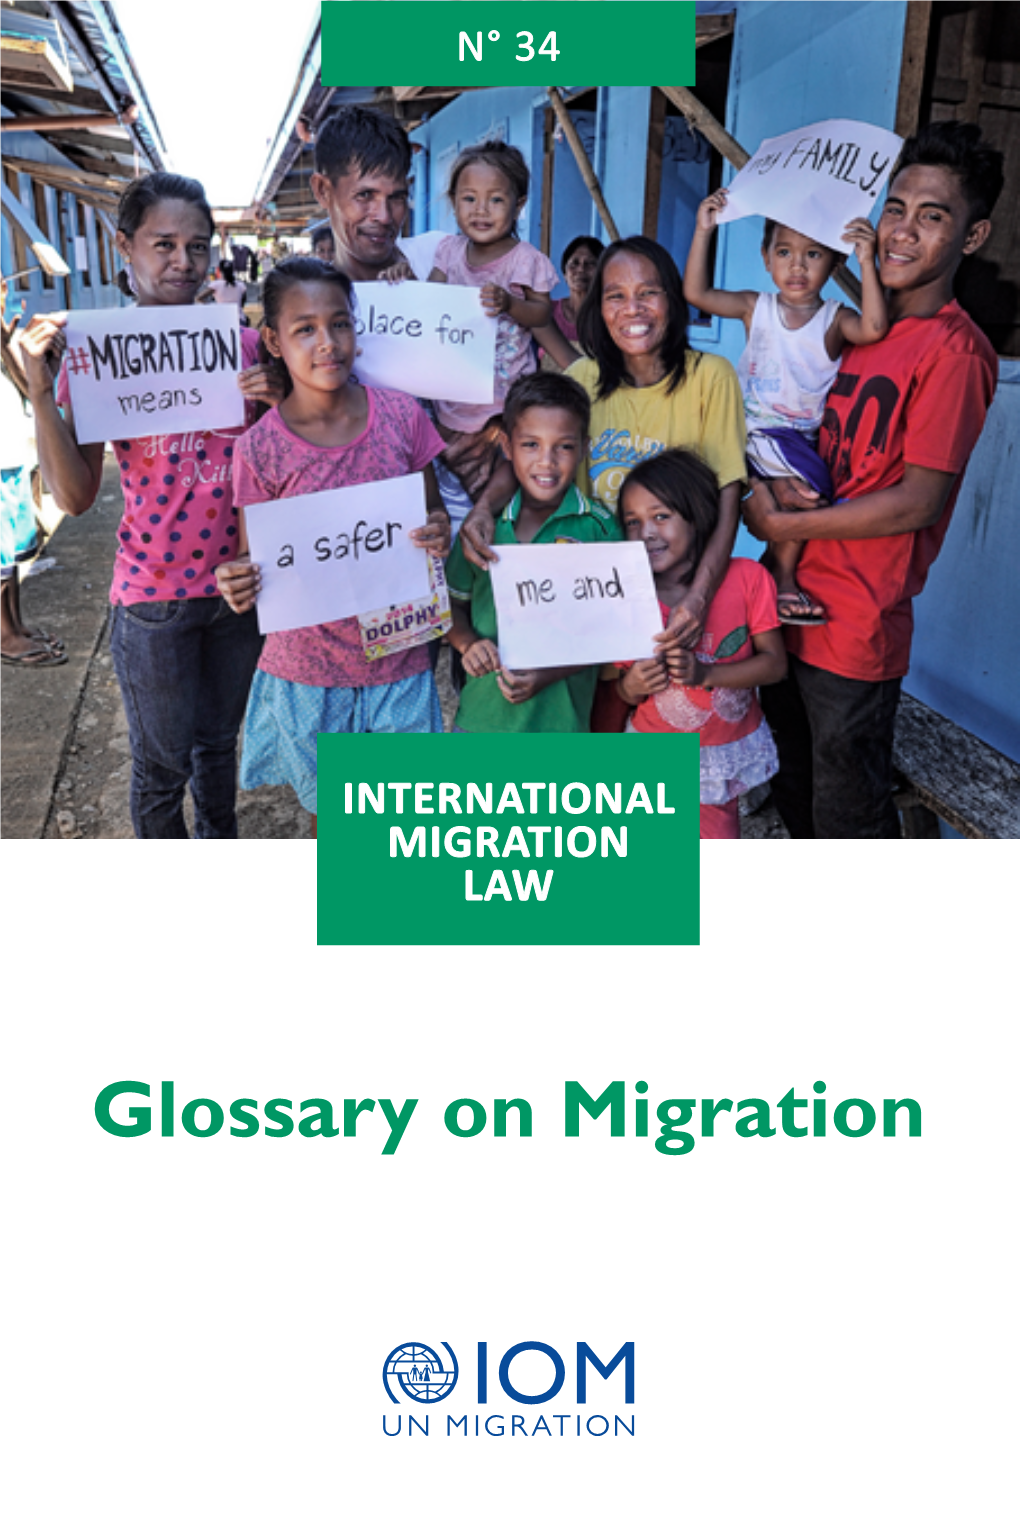 Glossary on Migration the Opinions Expressed in This Glossary Do Not Necessarily Reflect the Views of the International Organization for Migration (IOM)